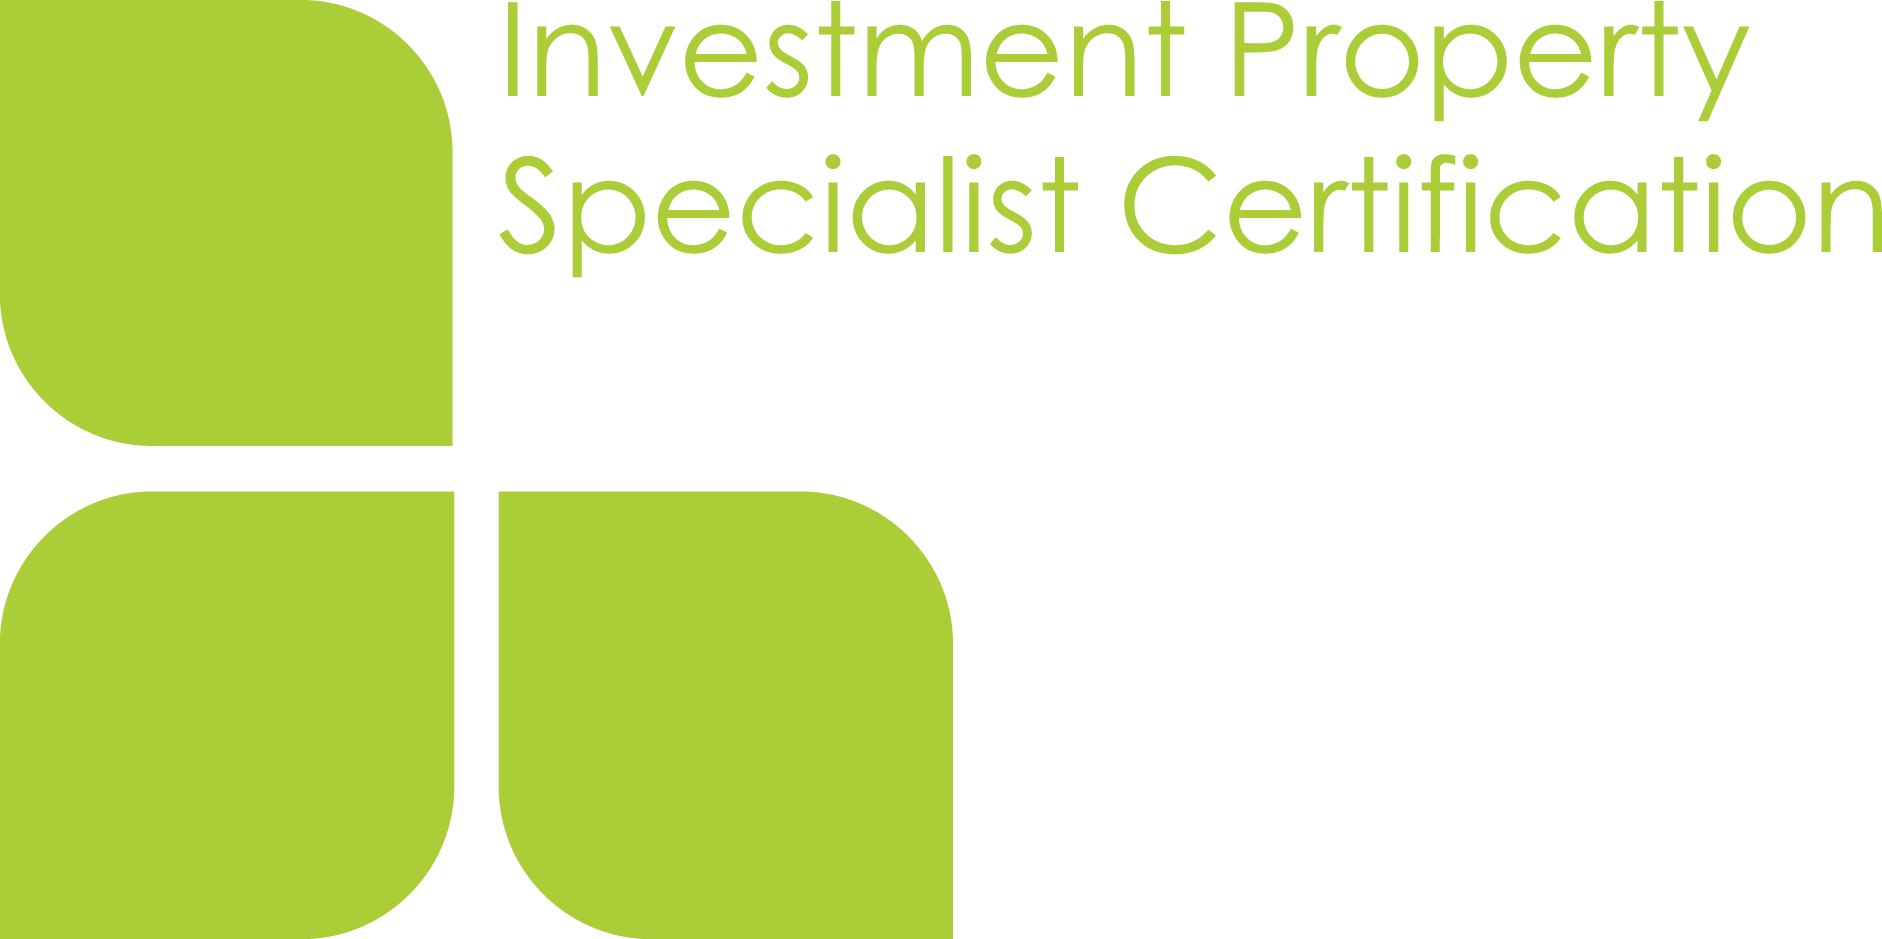 Investment property specialist